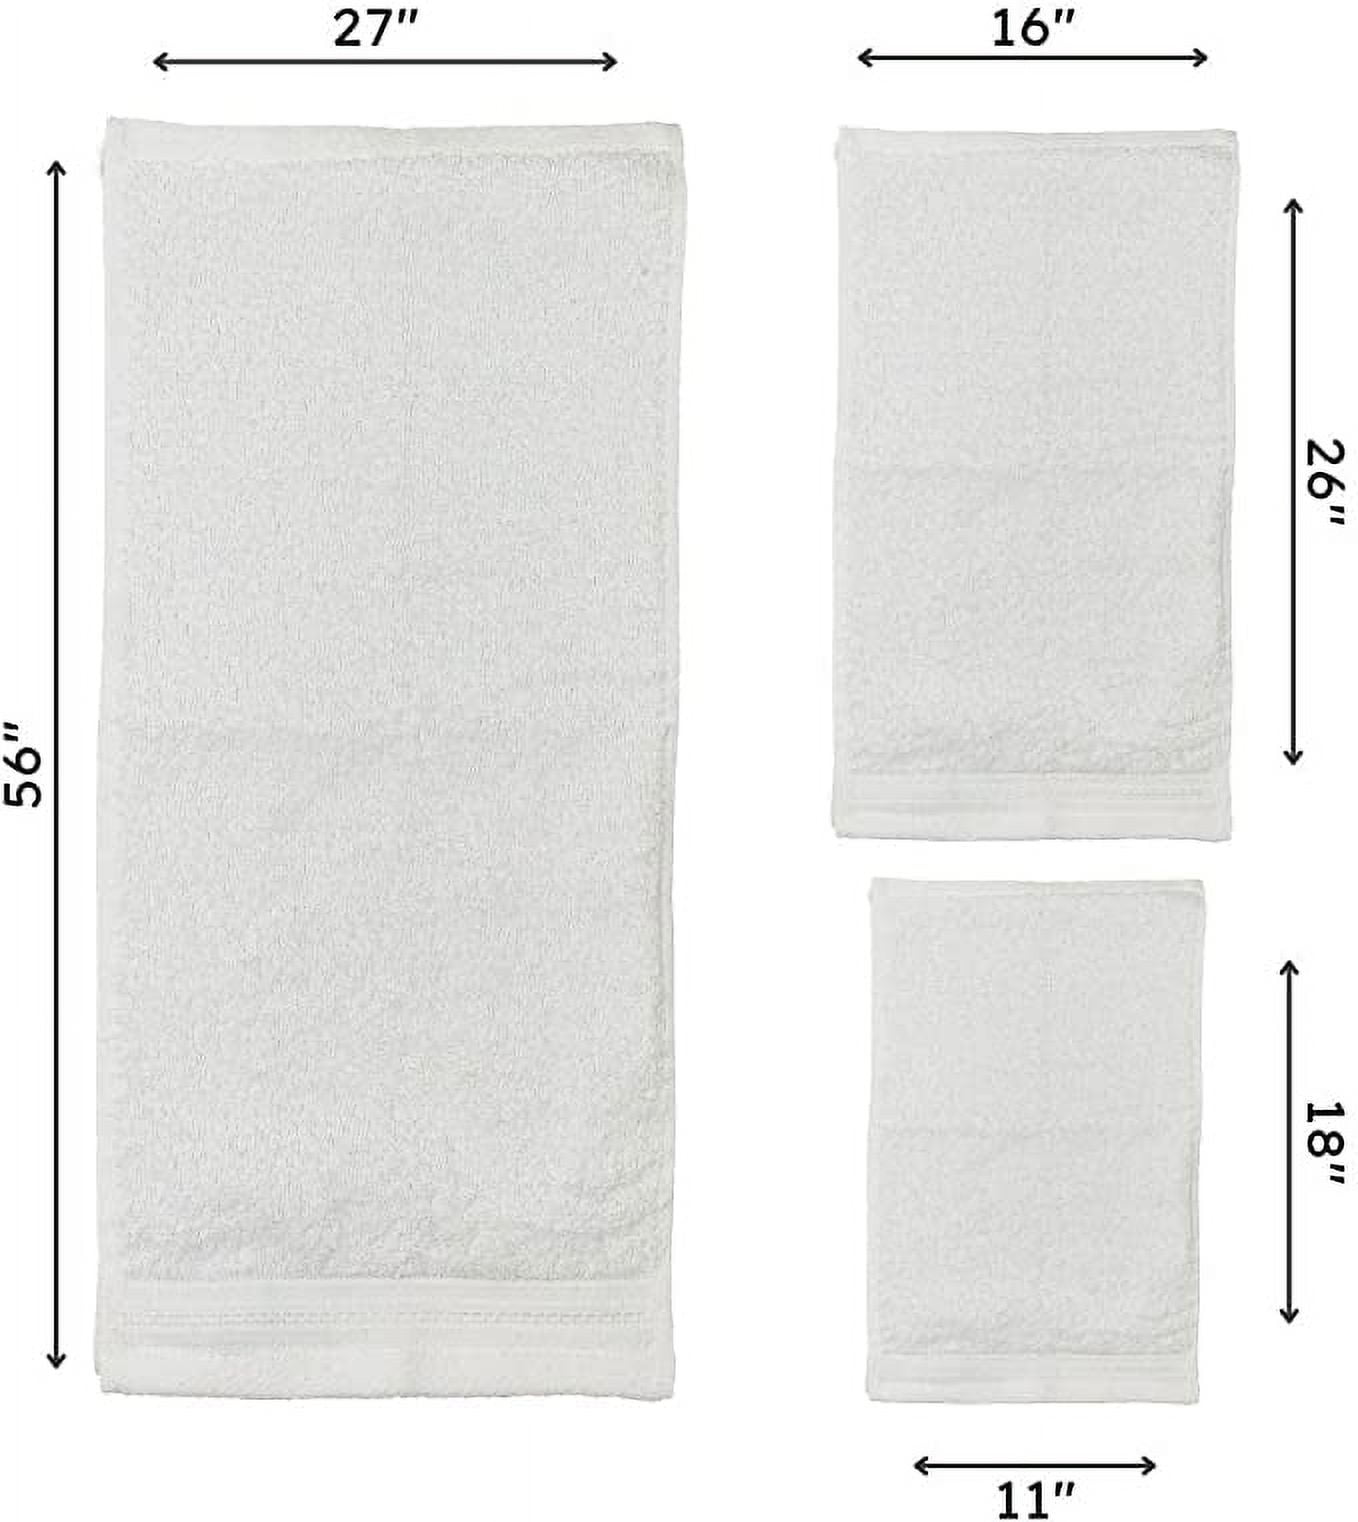 Kaufman - Personalized Luxury Hotel Quality Towels Embroidered (2 Bath Towel,  2 Hand Towel, & 2 Washcloth) White Towel Set with Monogrammed Letter 100%  Cotton for Bathroom, Kitchen and Spa. 